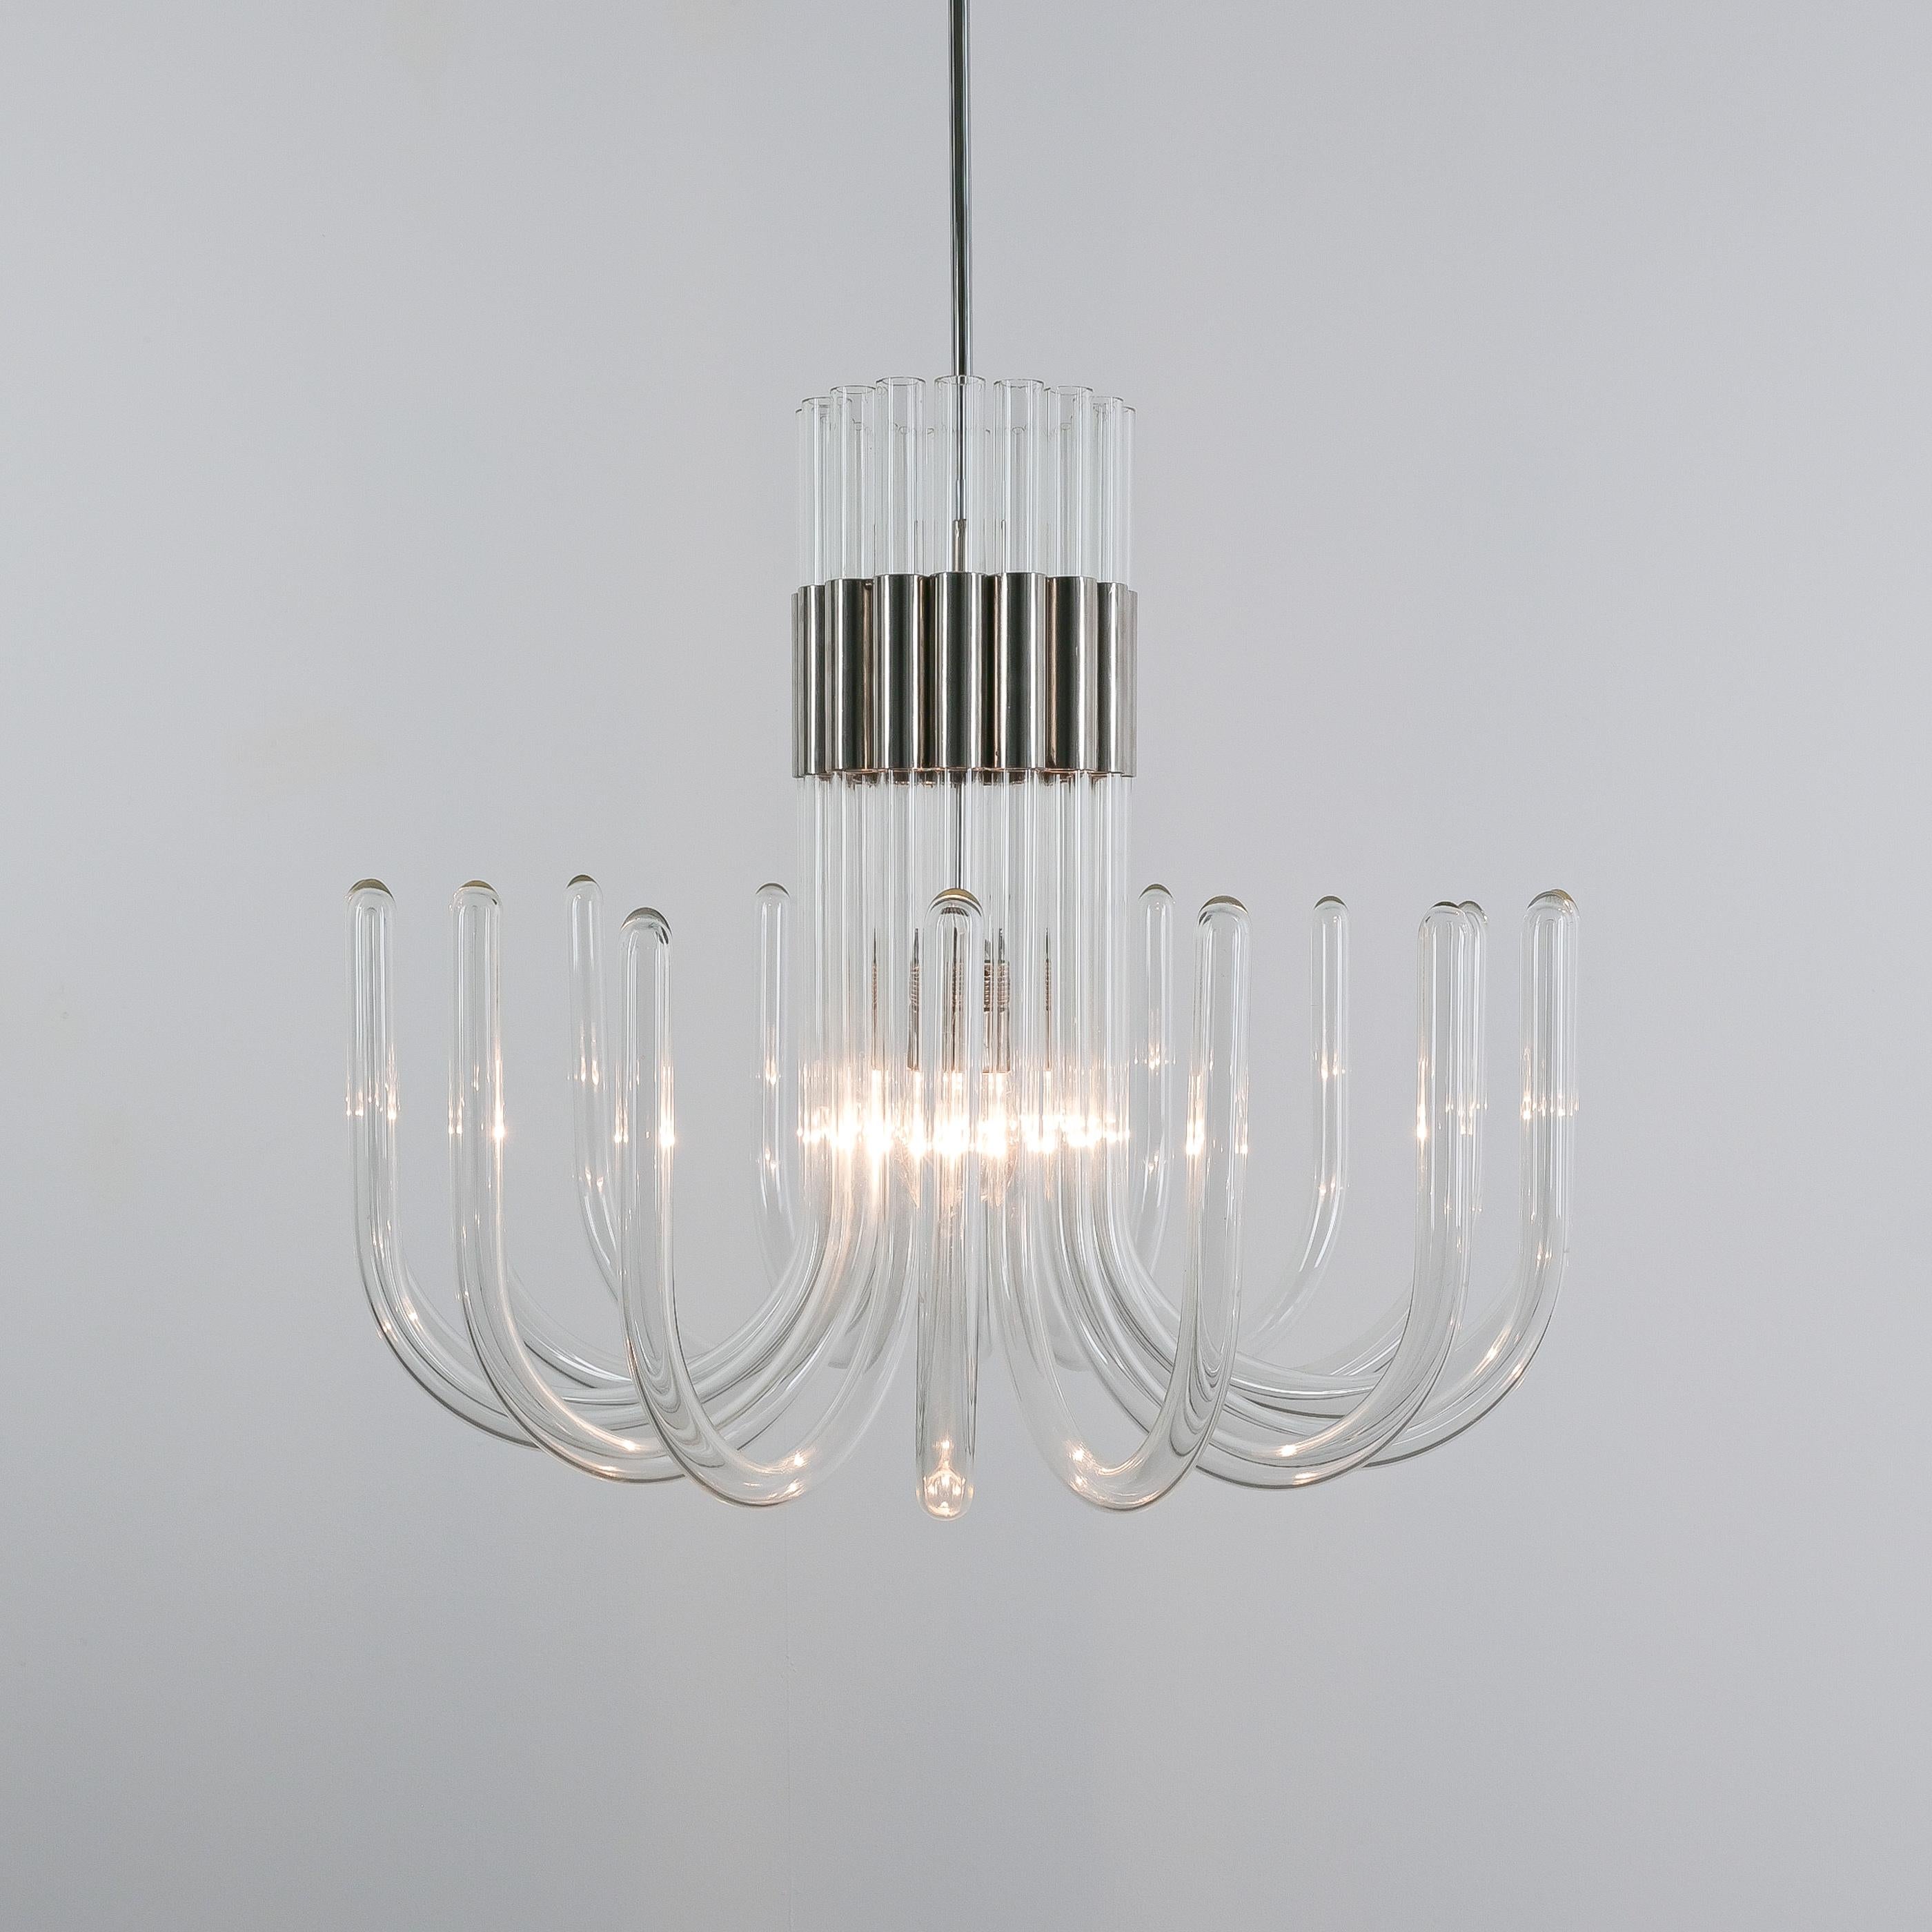 Bespoke Glass and Chrome Chandelier, Italy, circa 1970 For Sale 5